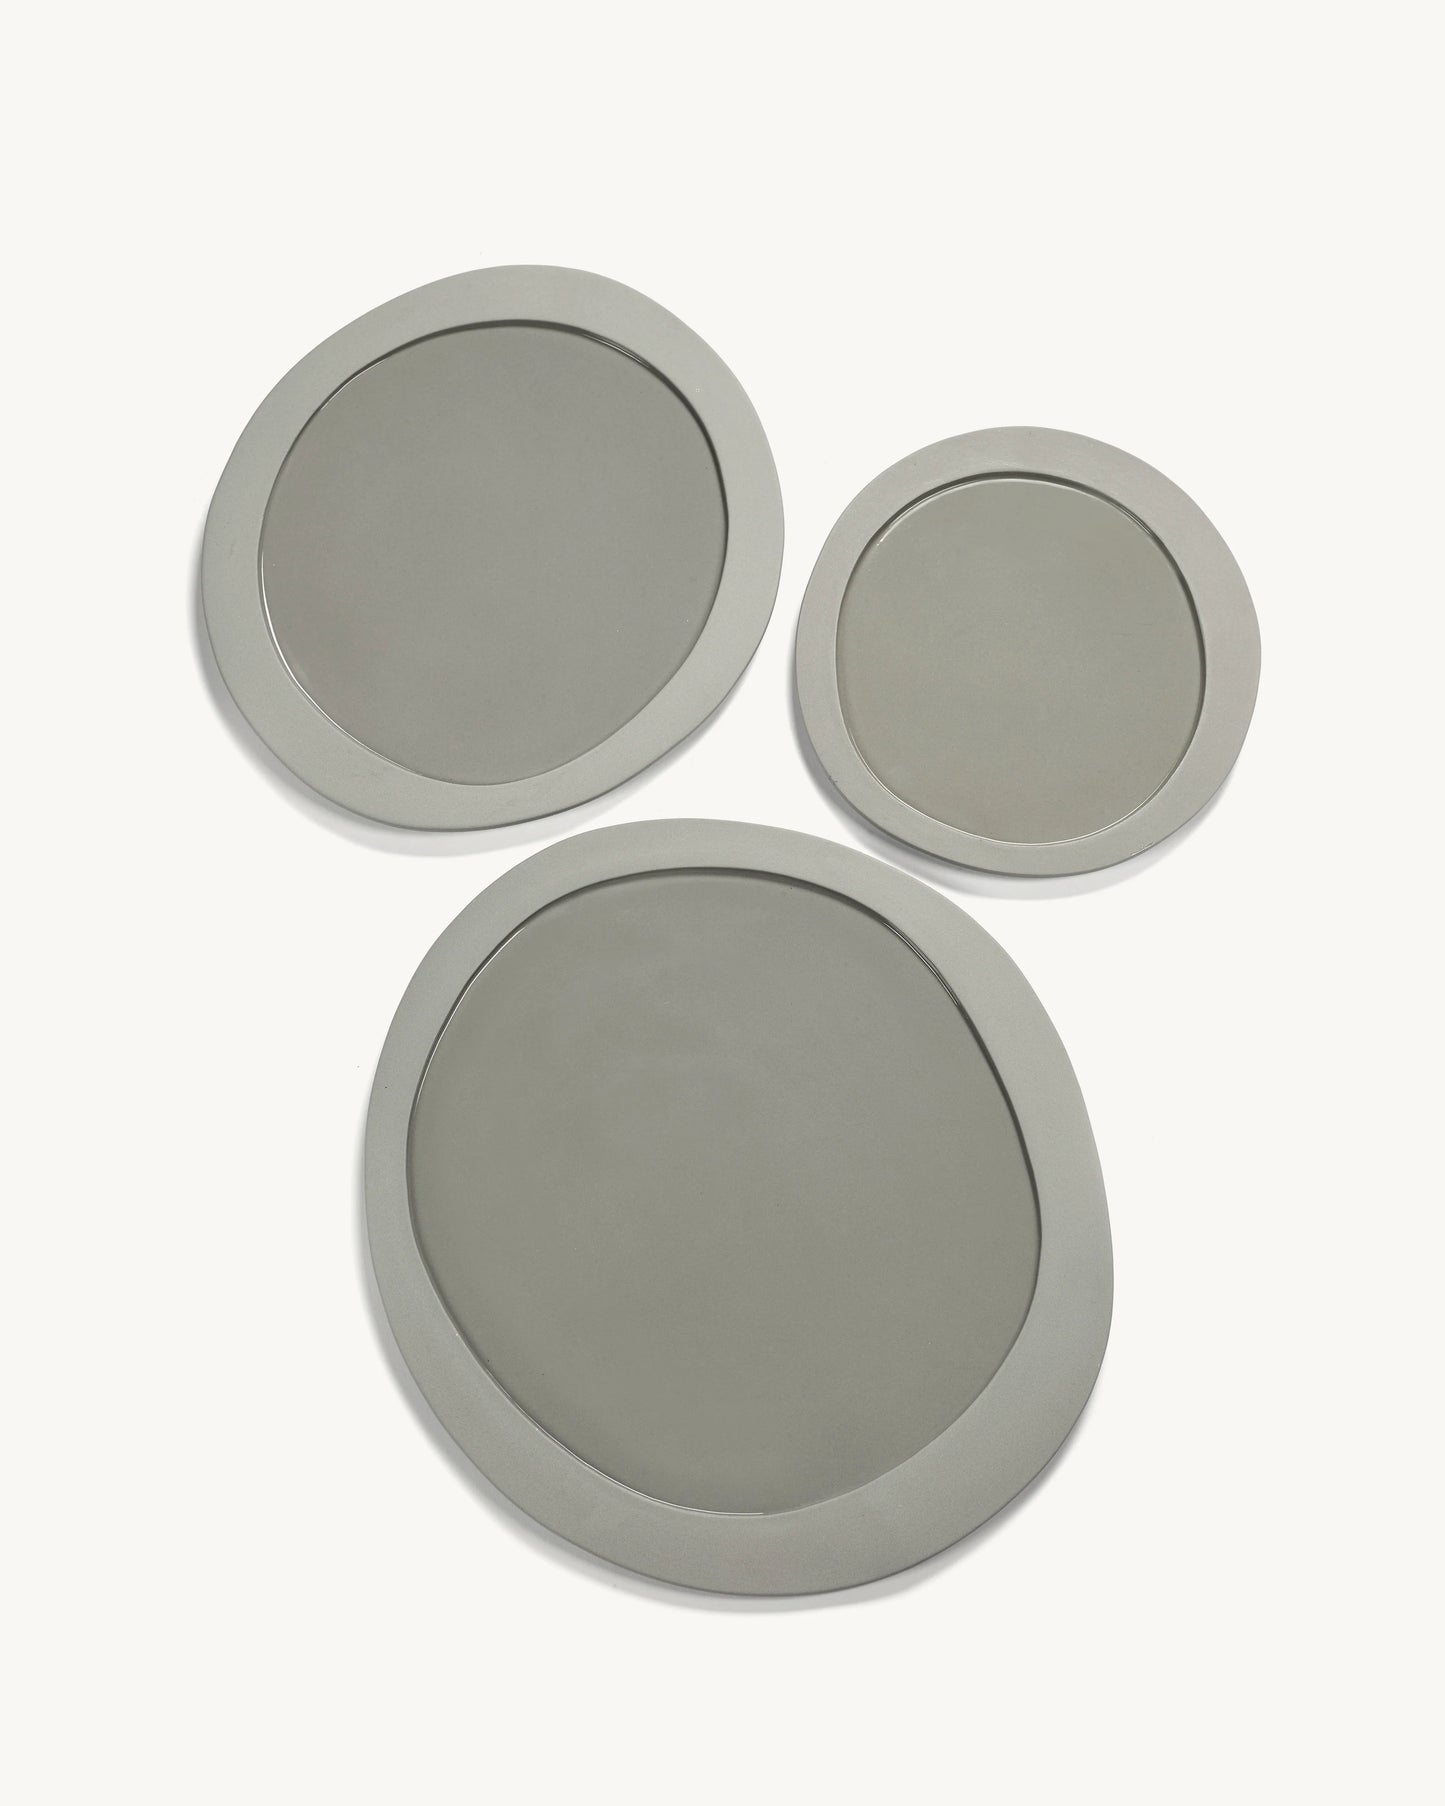 Valerie Objects Inner Circle Plate Large, light grey by Maarten Baas - $79.00